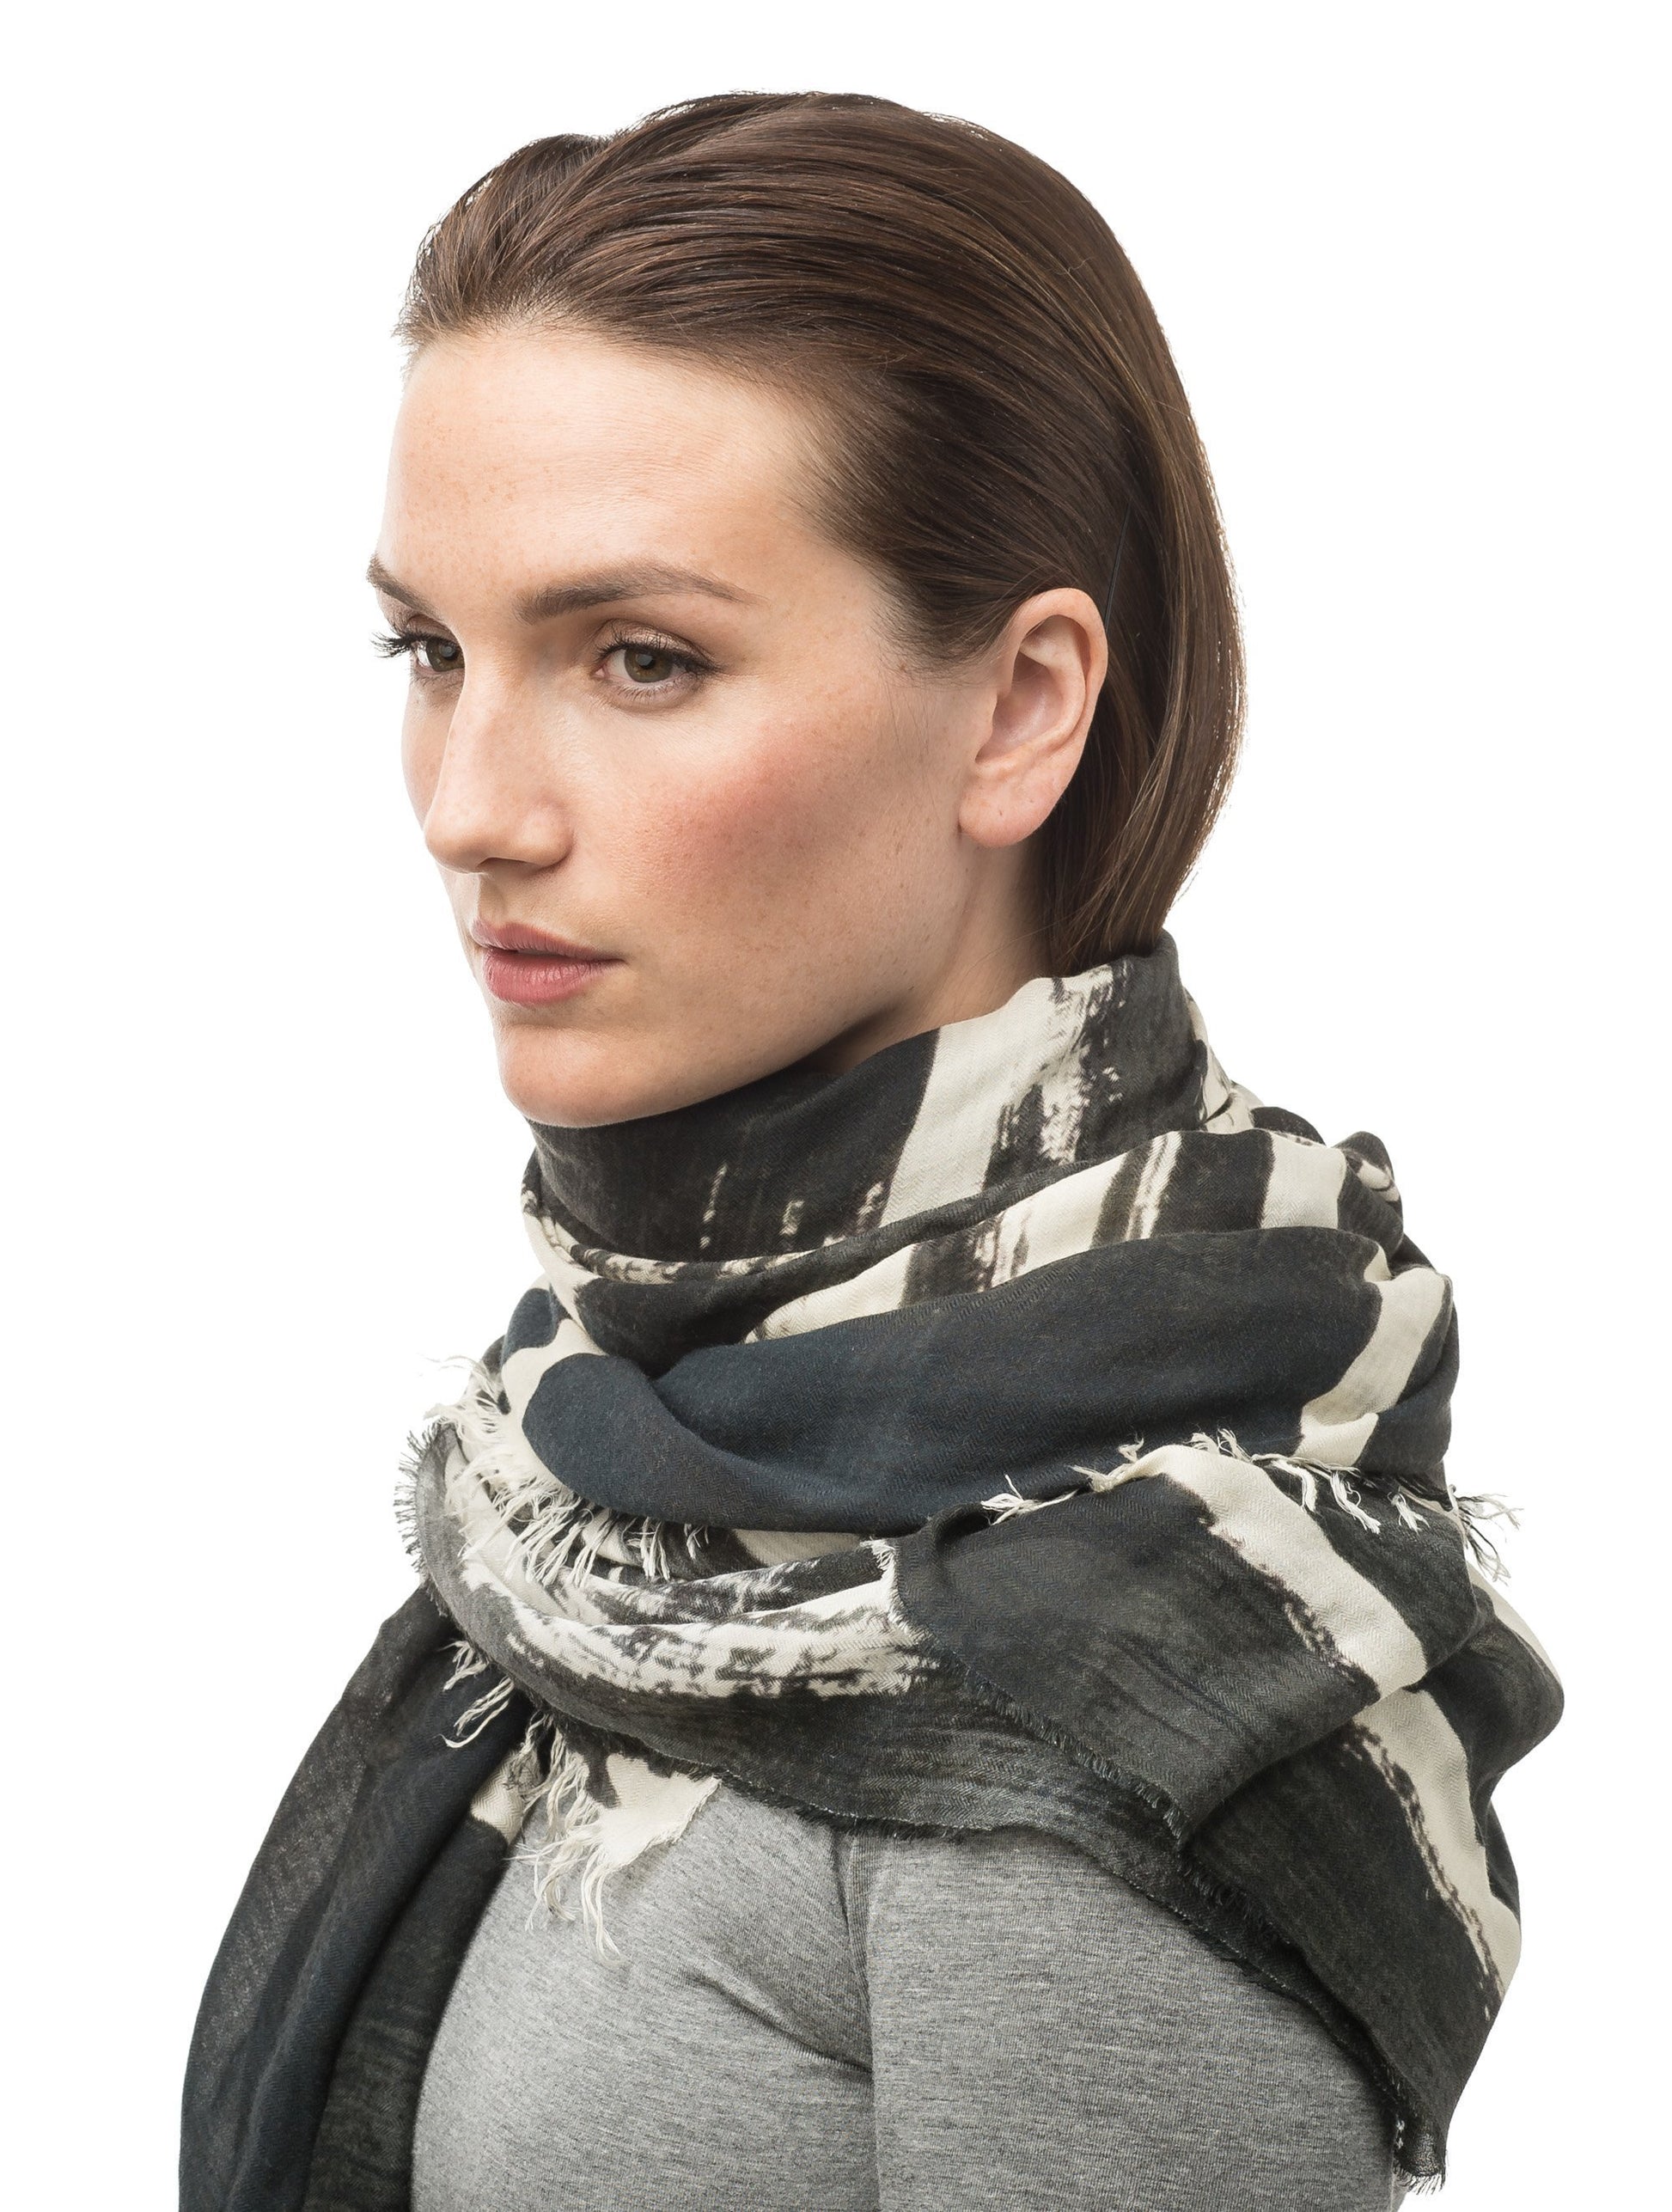 Square modal cashmere blend scarf with fringe edges in a contrast Black print